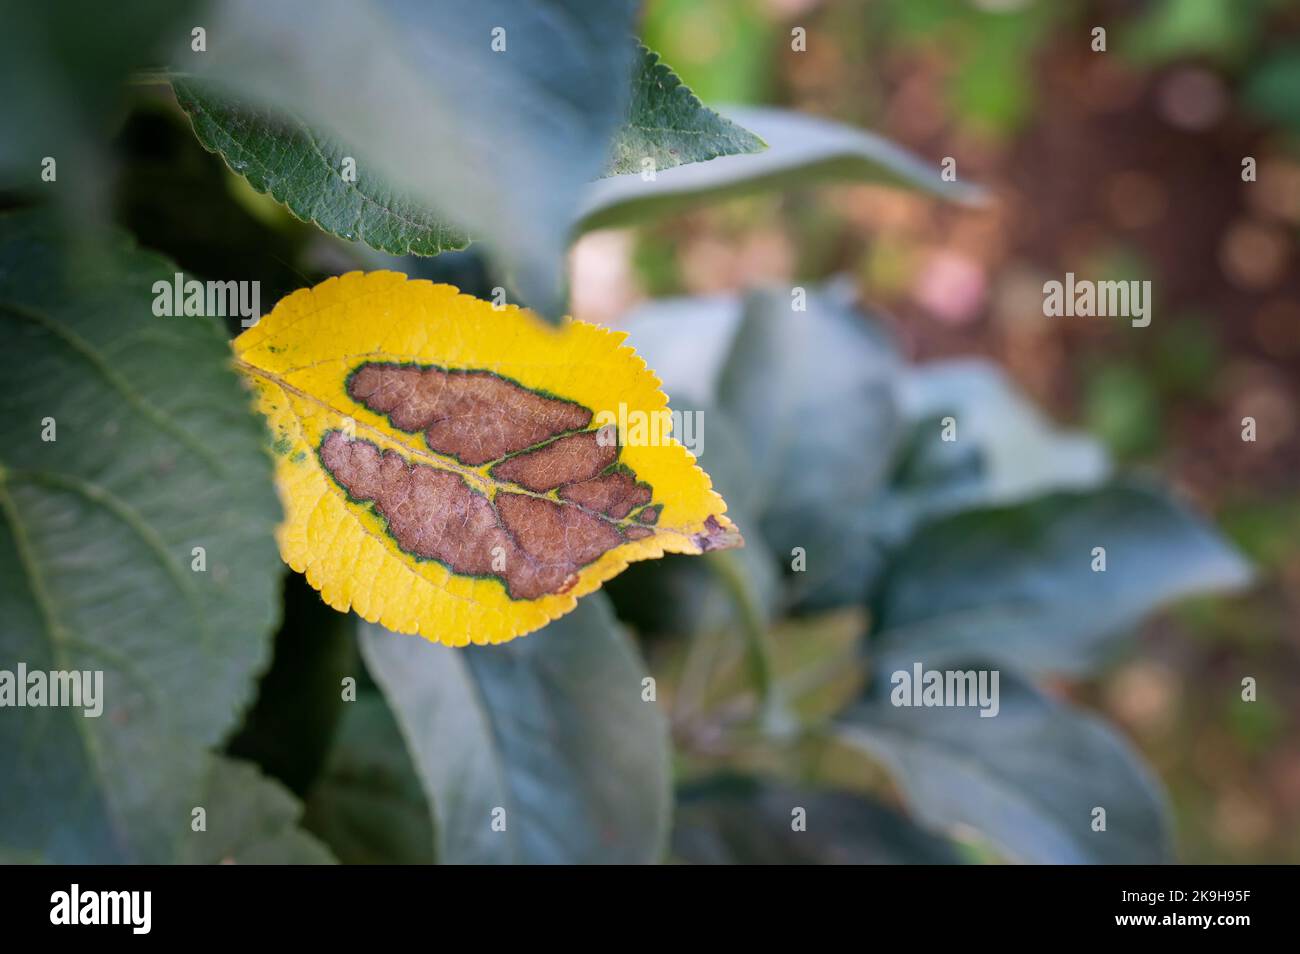 spot on the leaves of an alternaria on a sick apple tree. Rust and bacterial brown spotting on the leaf of a columnar apple tree. Stock Photo